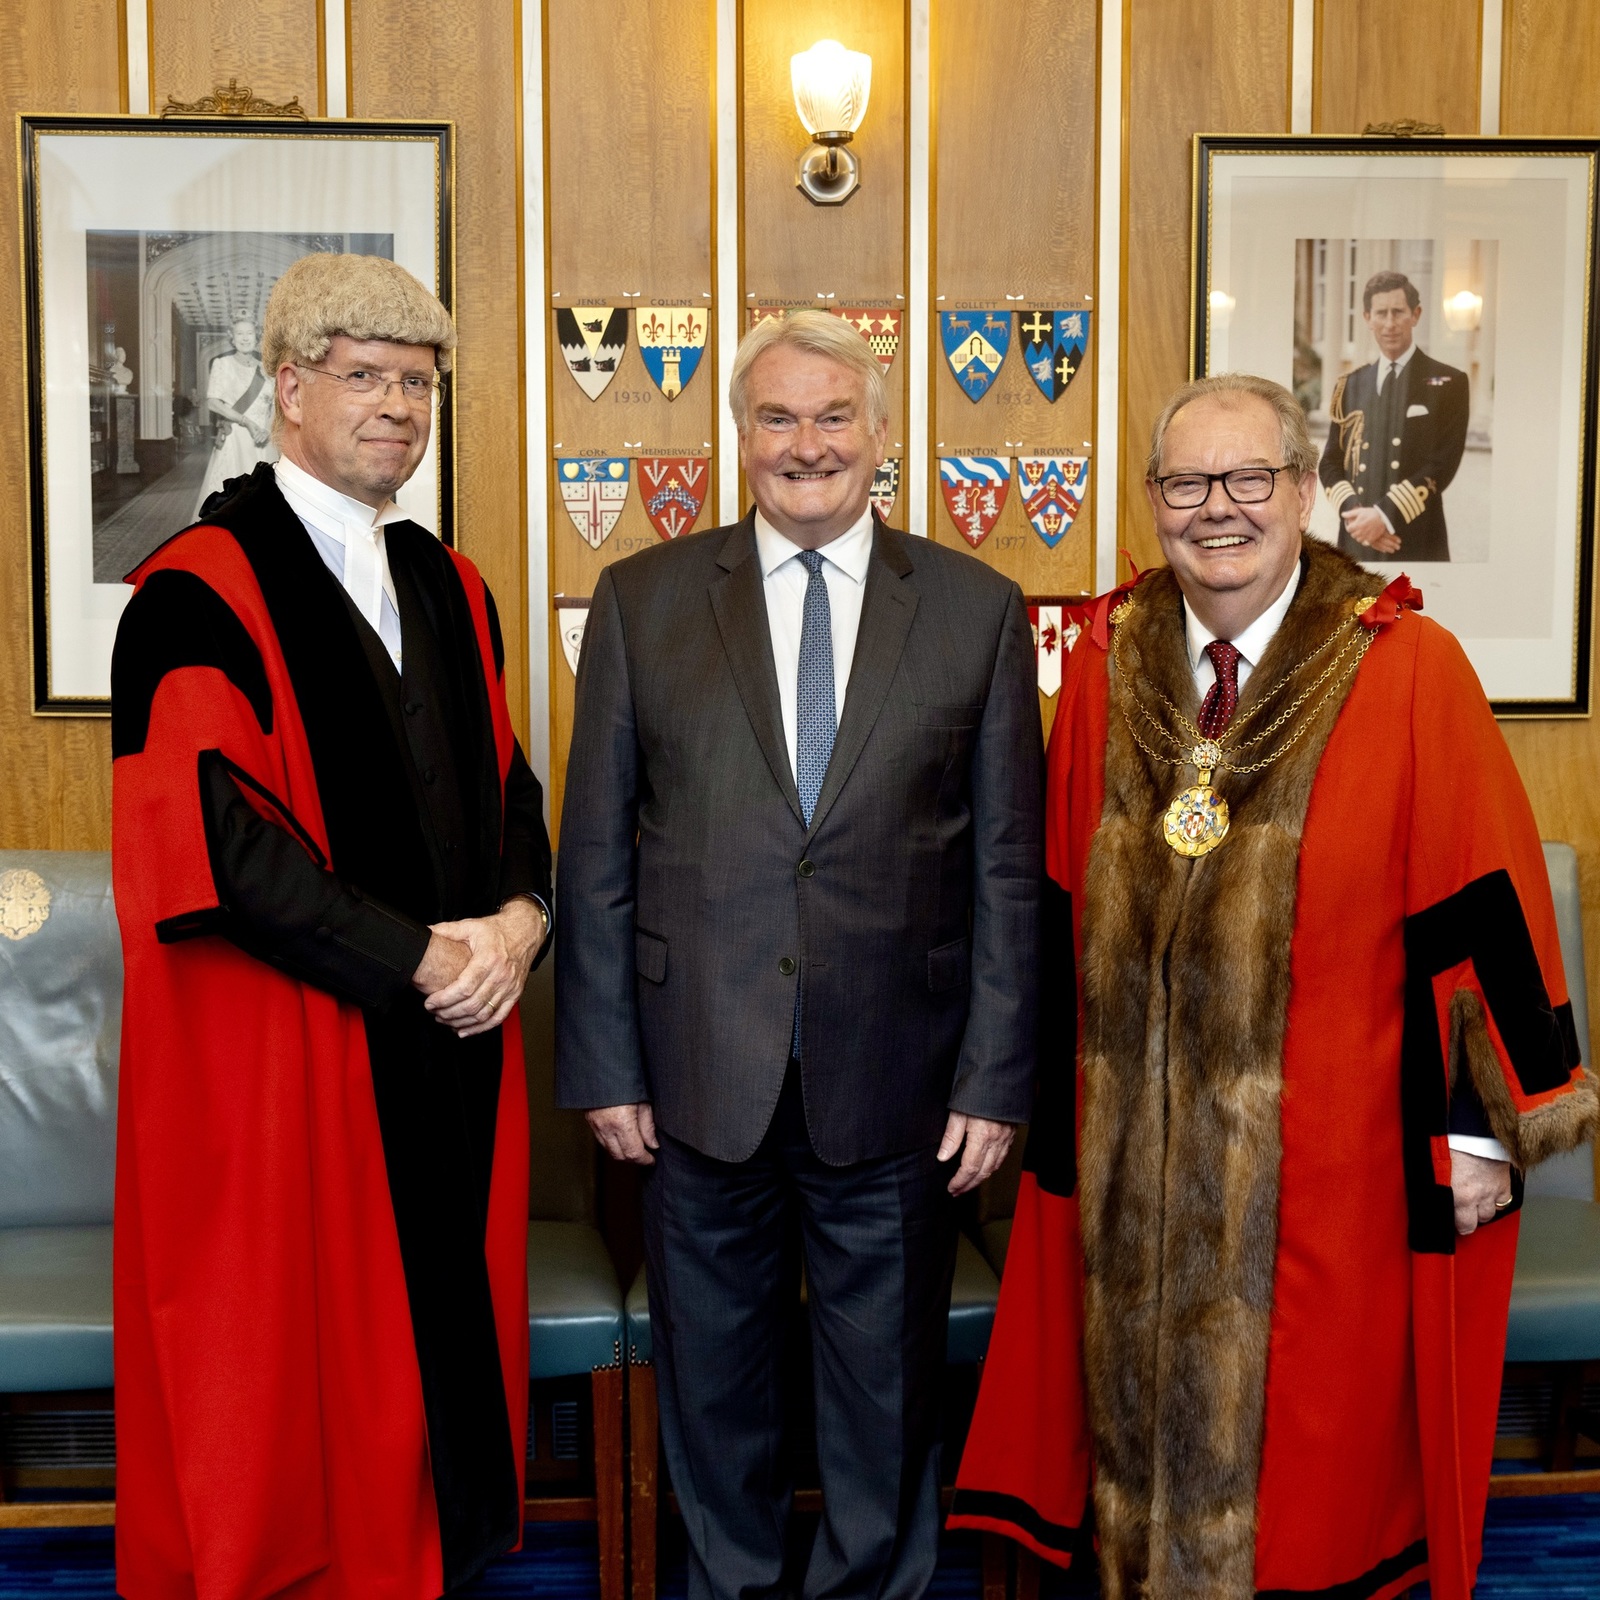 7 September 2023 - I was delighted to host a Special Valedictory Reception at The Old Bailey on behalf the Magistracy who wished to show their appreciation and to recognise the significant contribution and service provided by the Lord Chief Justice, The Rt Hon. the Lord Burnett of Maldon .